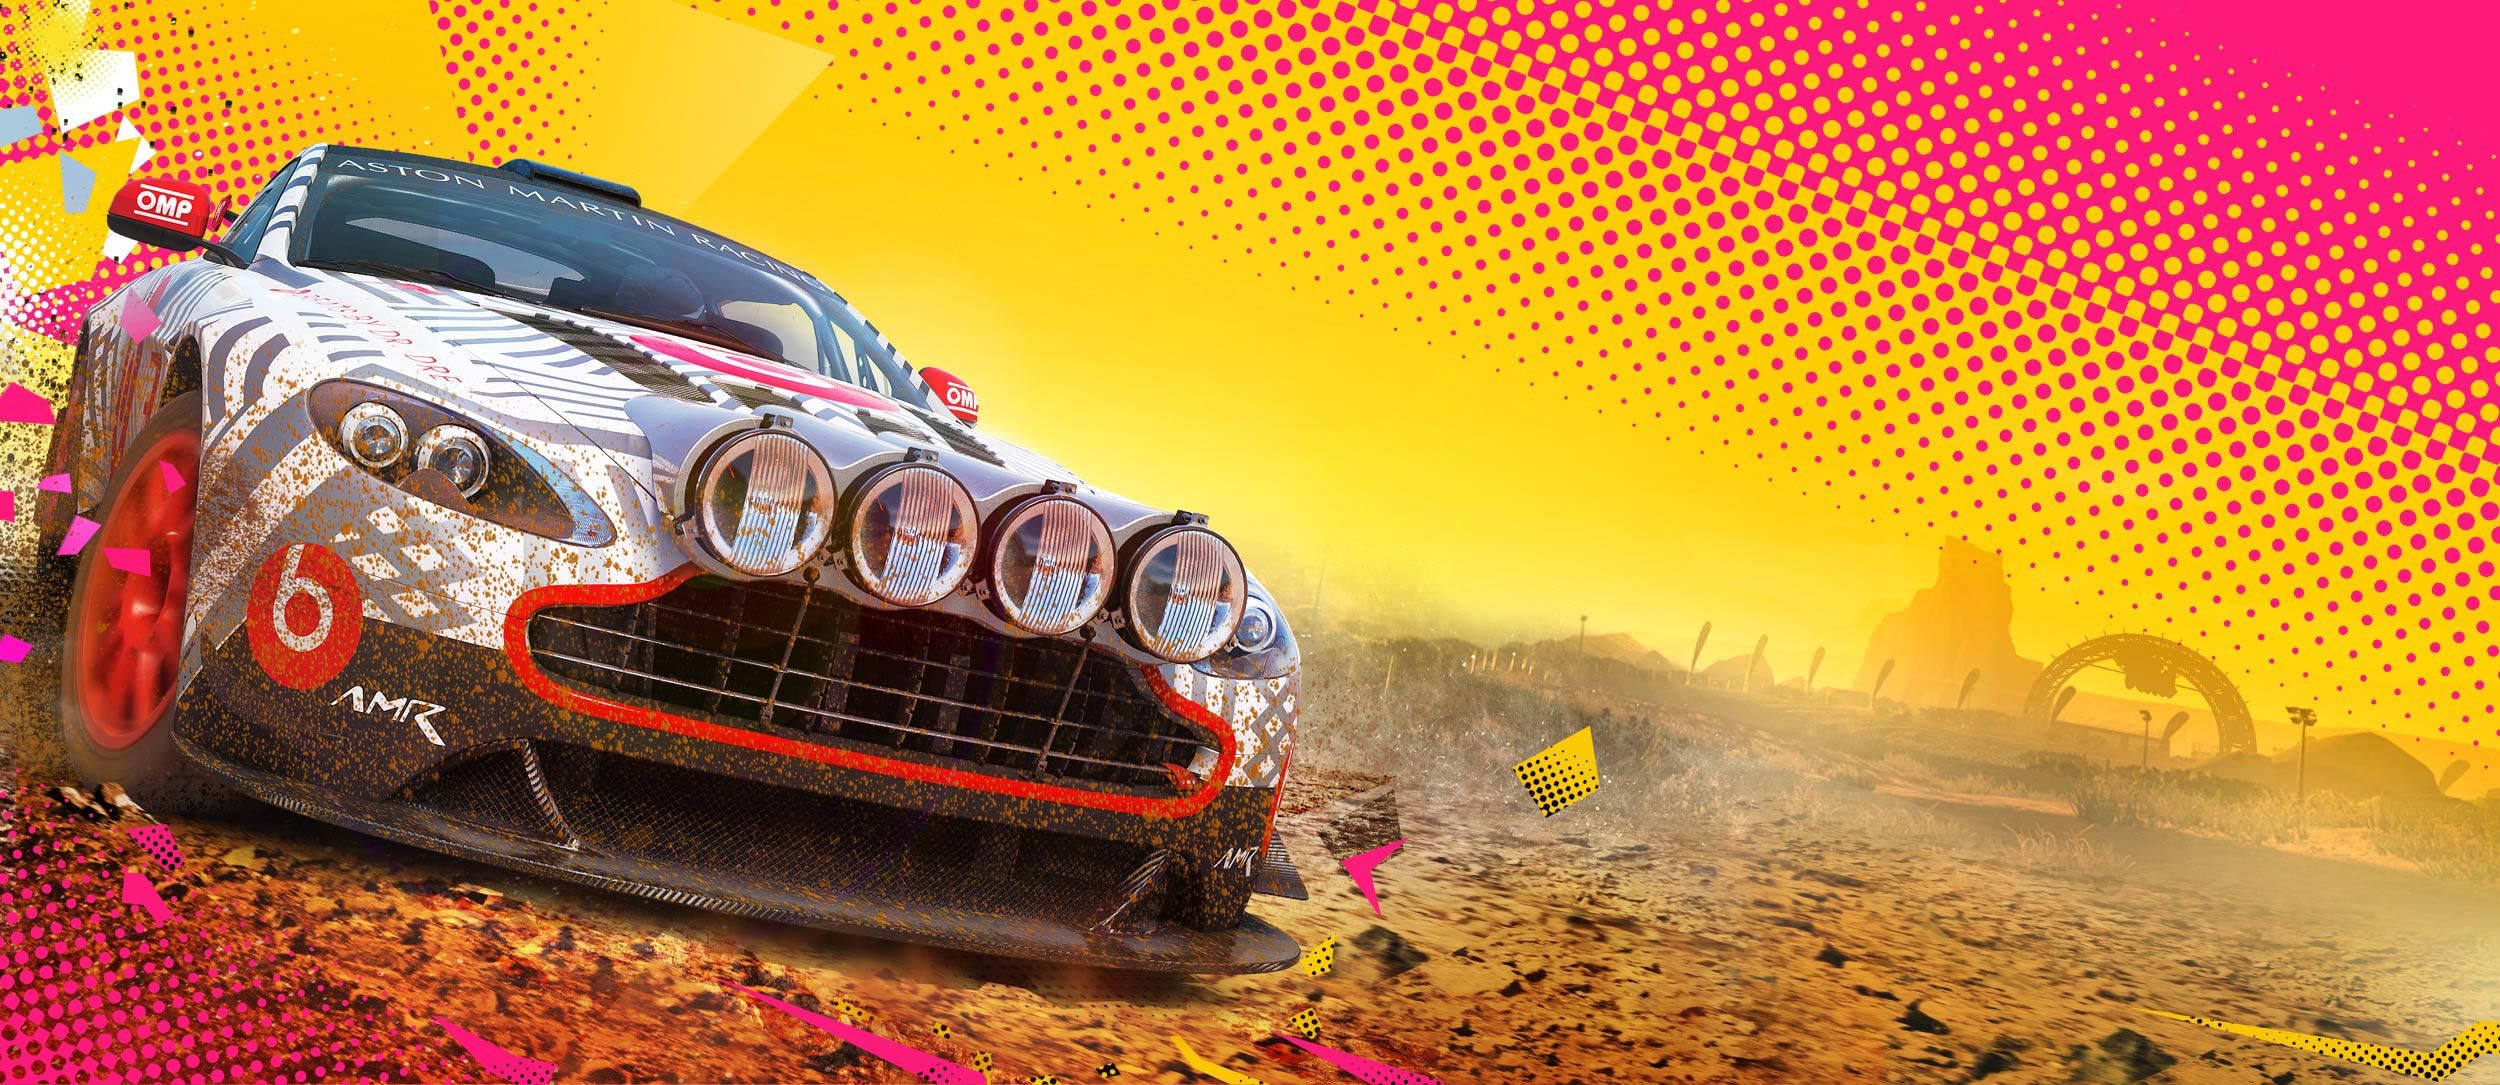 download dirt 5 ps4 for free